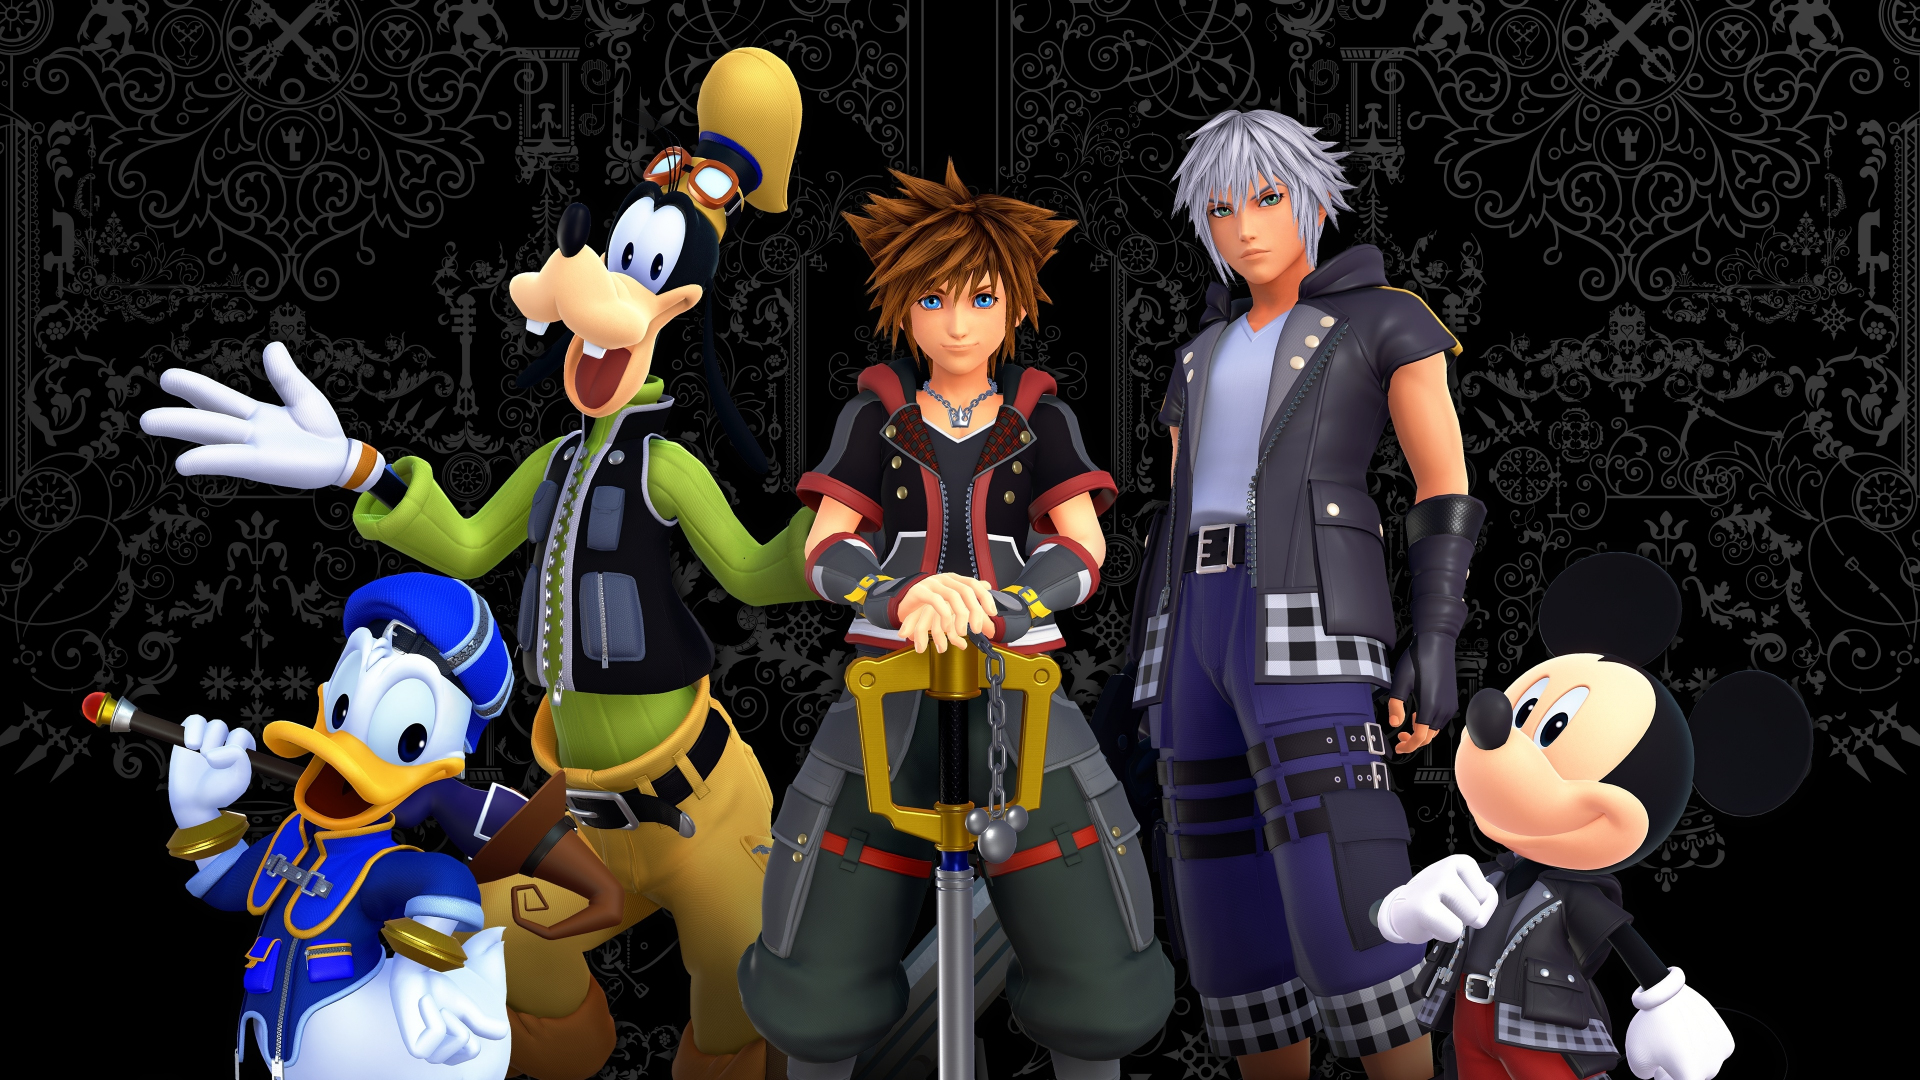 Download 19x1080 Wallpaper 18 Video Game Kingdom Hearts Iii Full Hd Hdtv Fhd 1080p 19x1080 Hd Image Background 9093